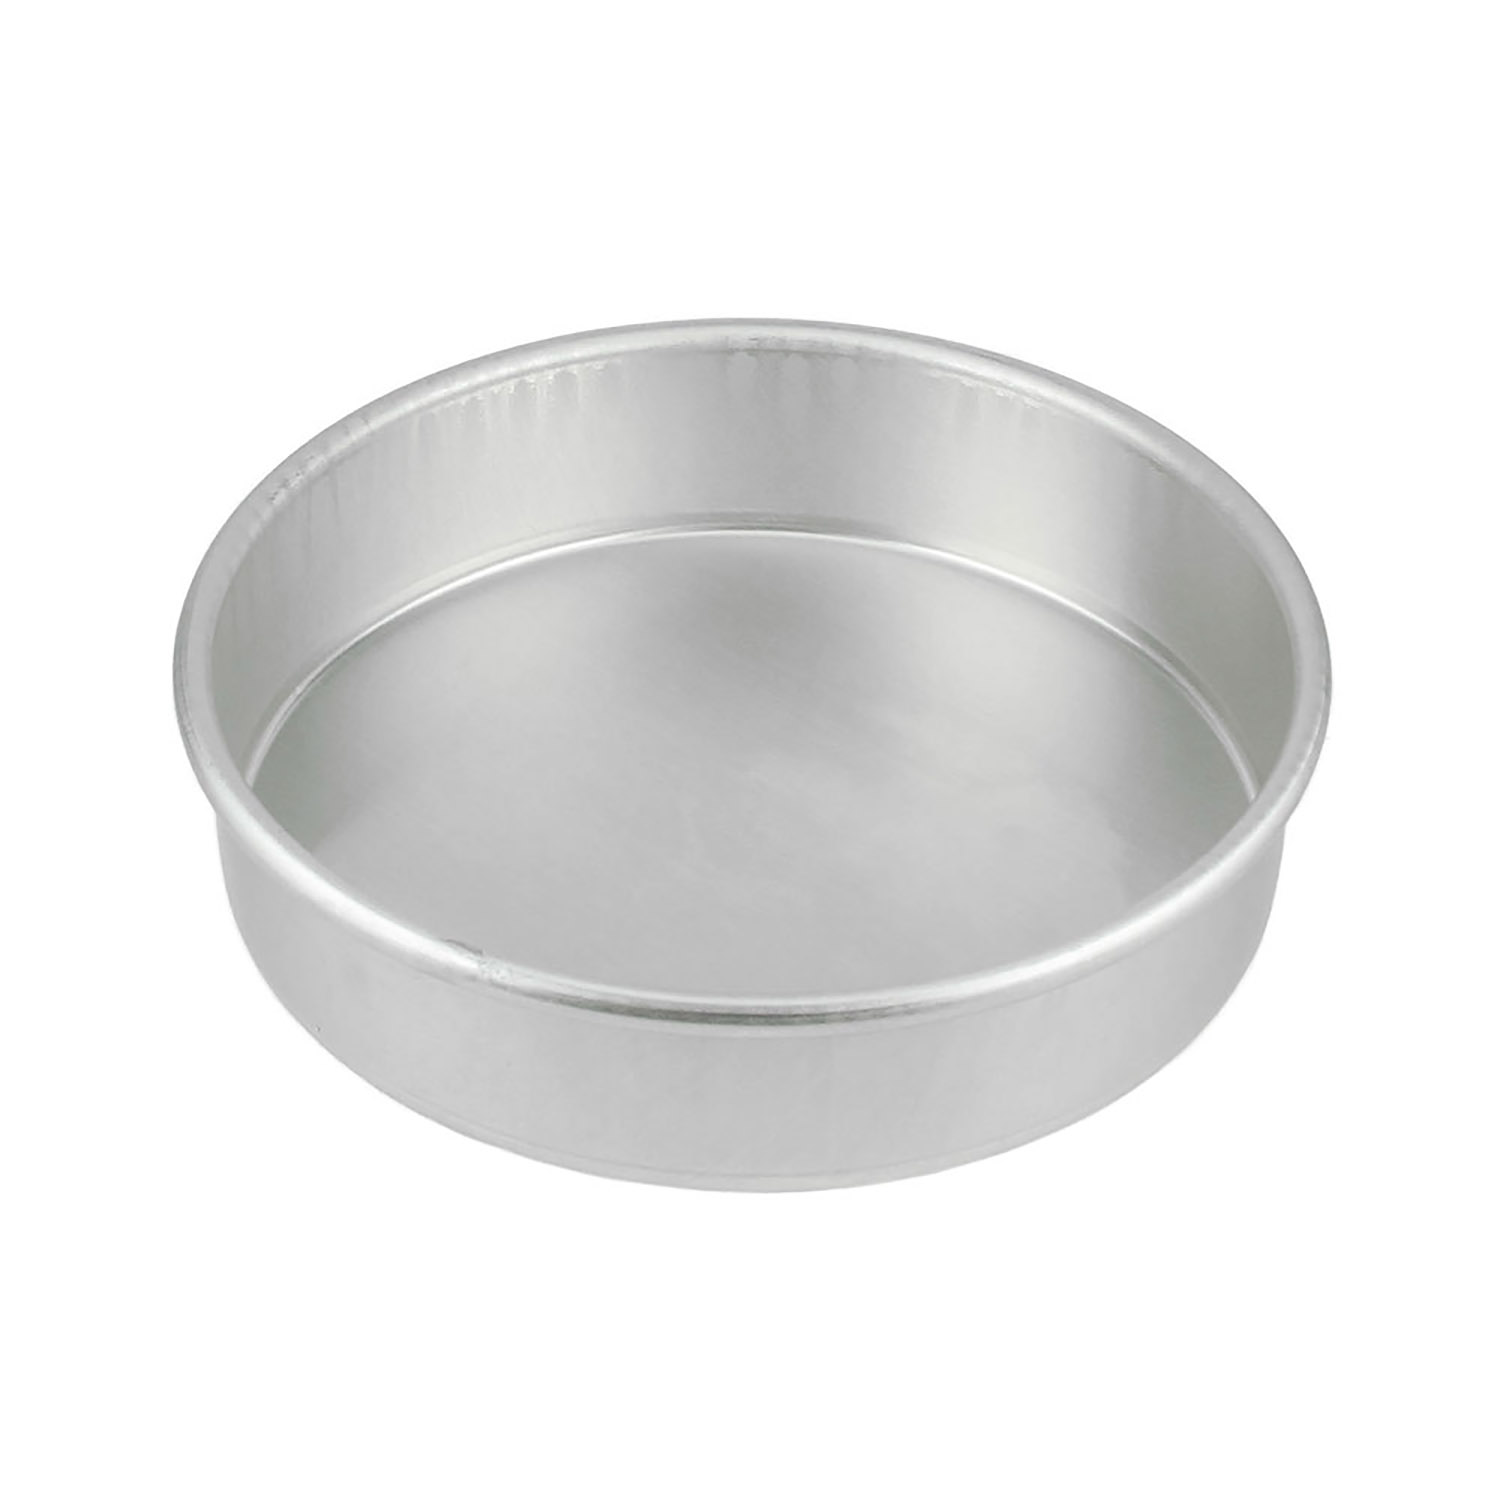 Cake Pan Round 8 x 2 Inches by Magic Line